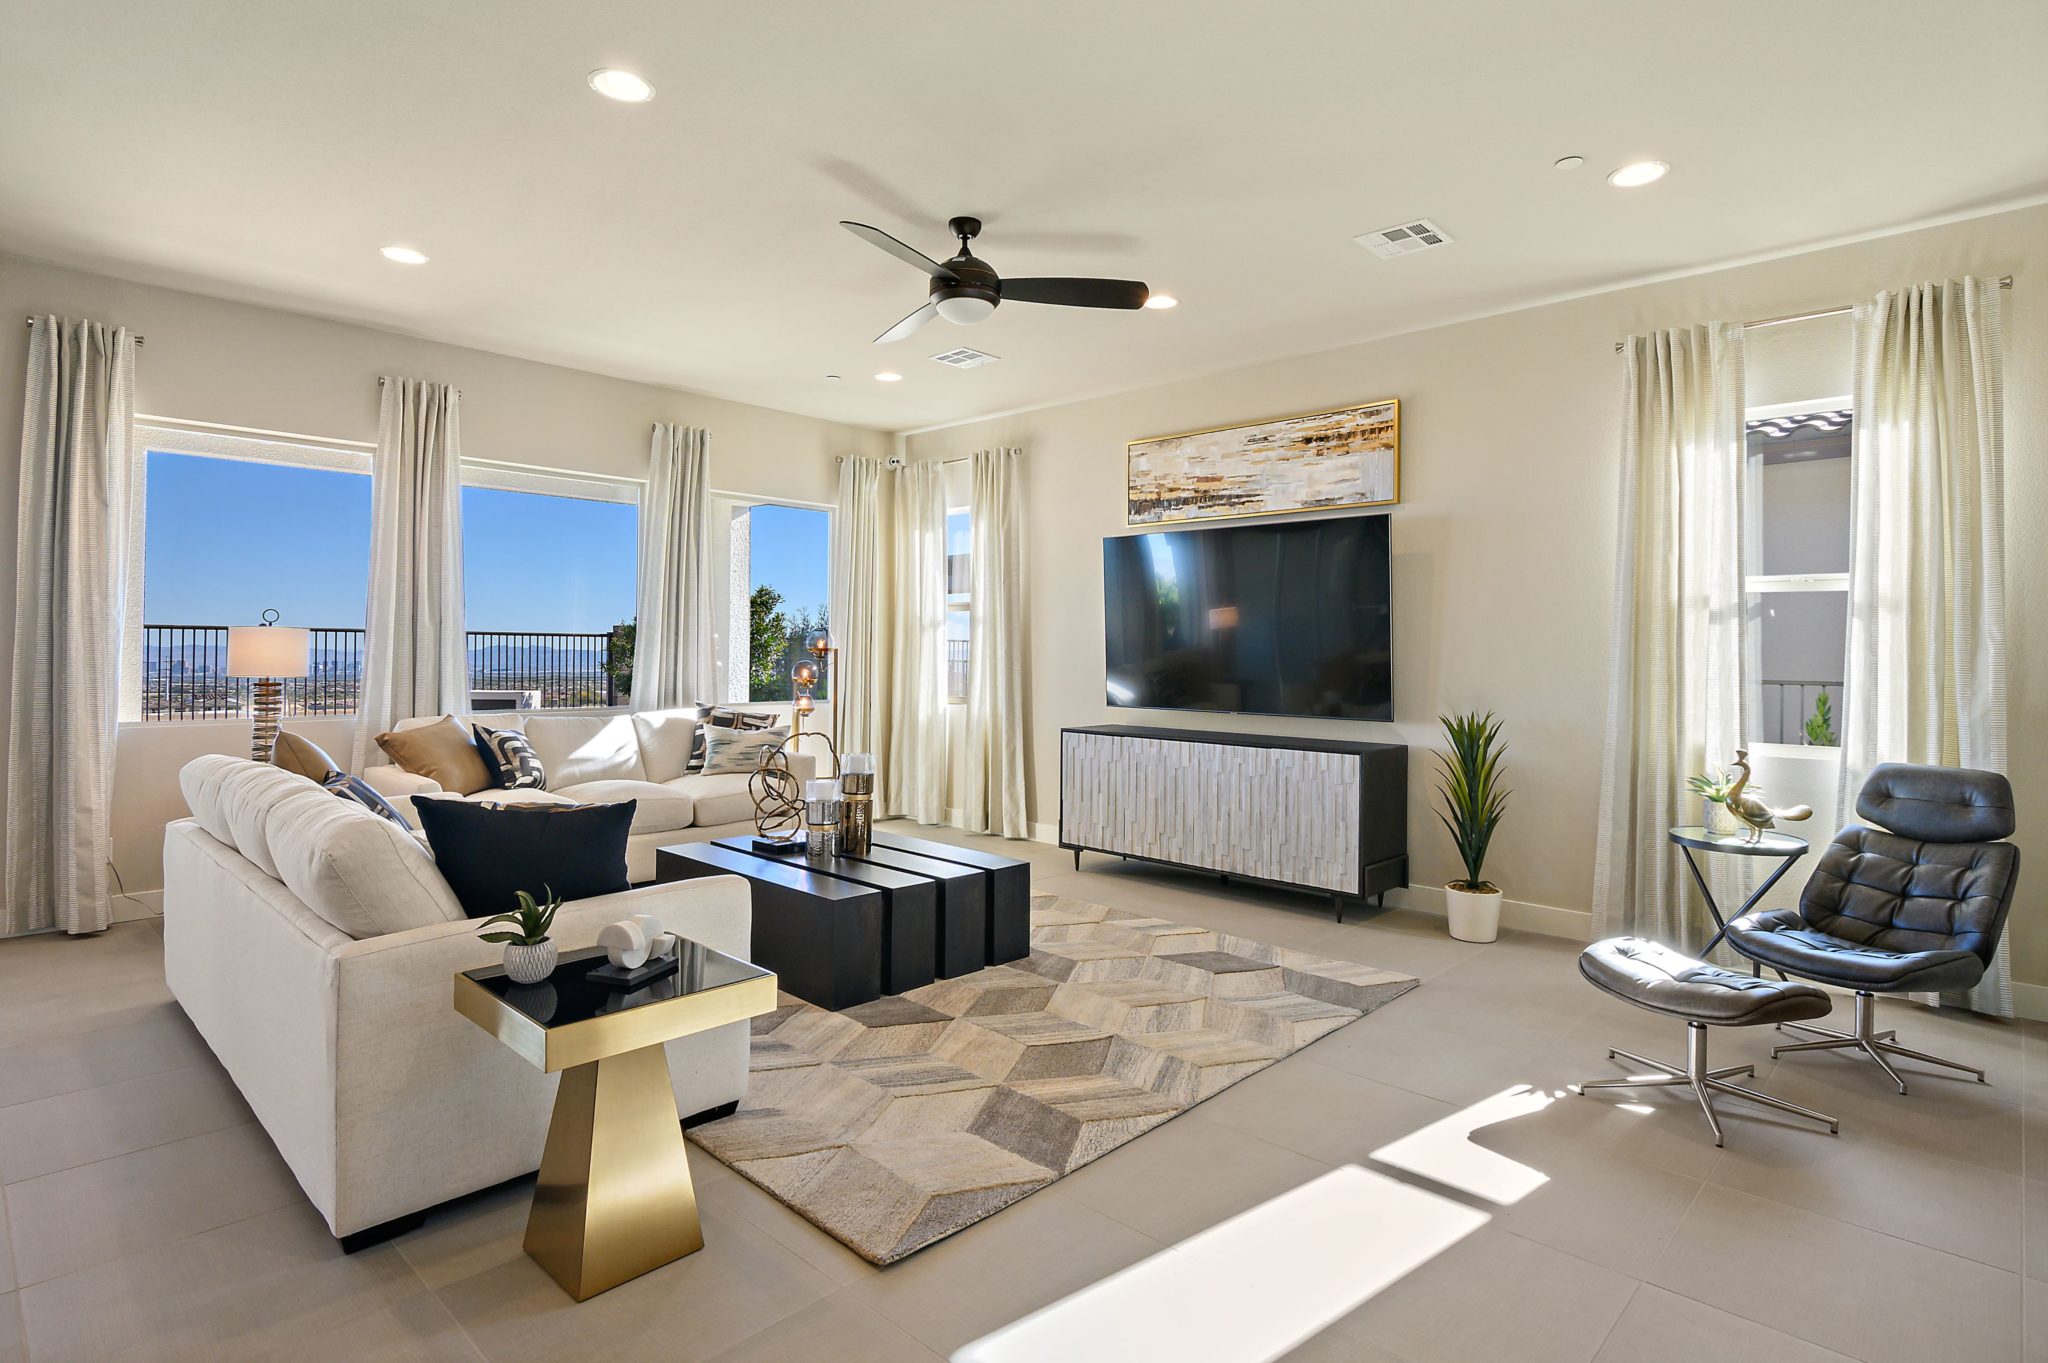 Living Room of Sunflower Model at Savannah by Taylor Morrison